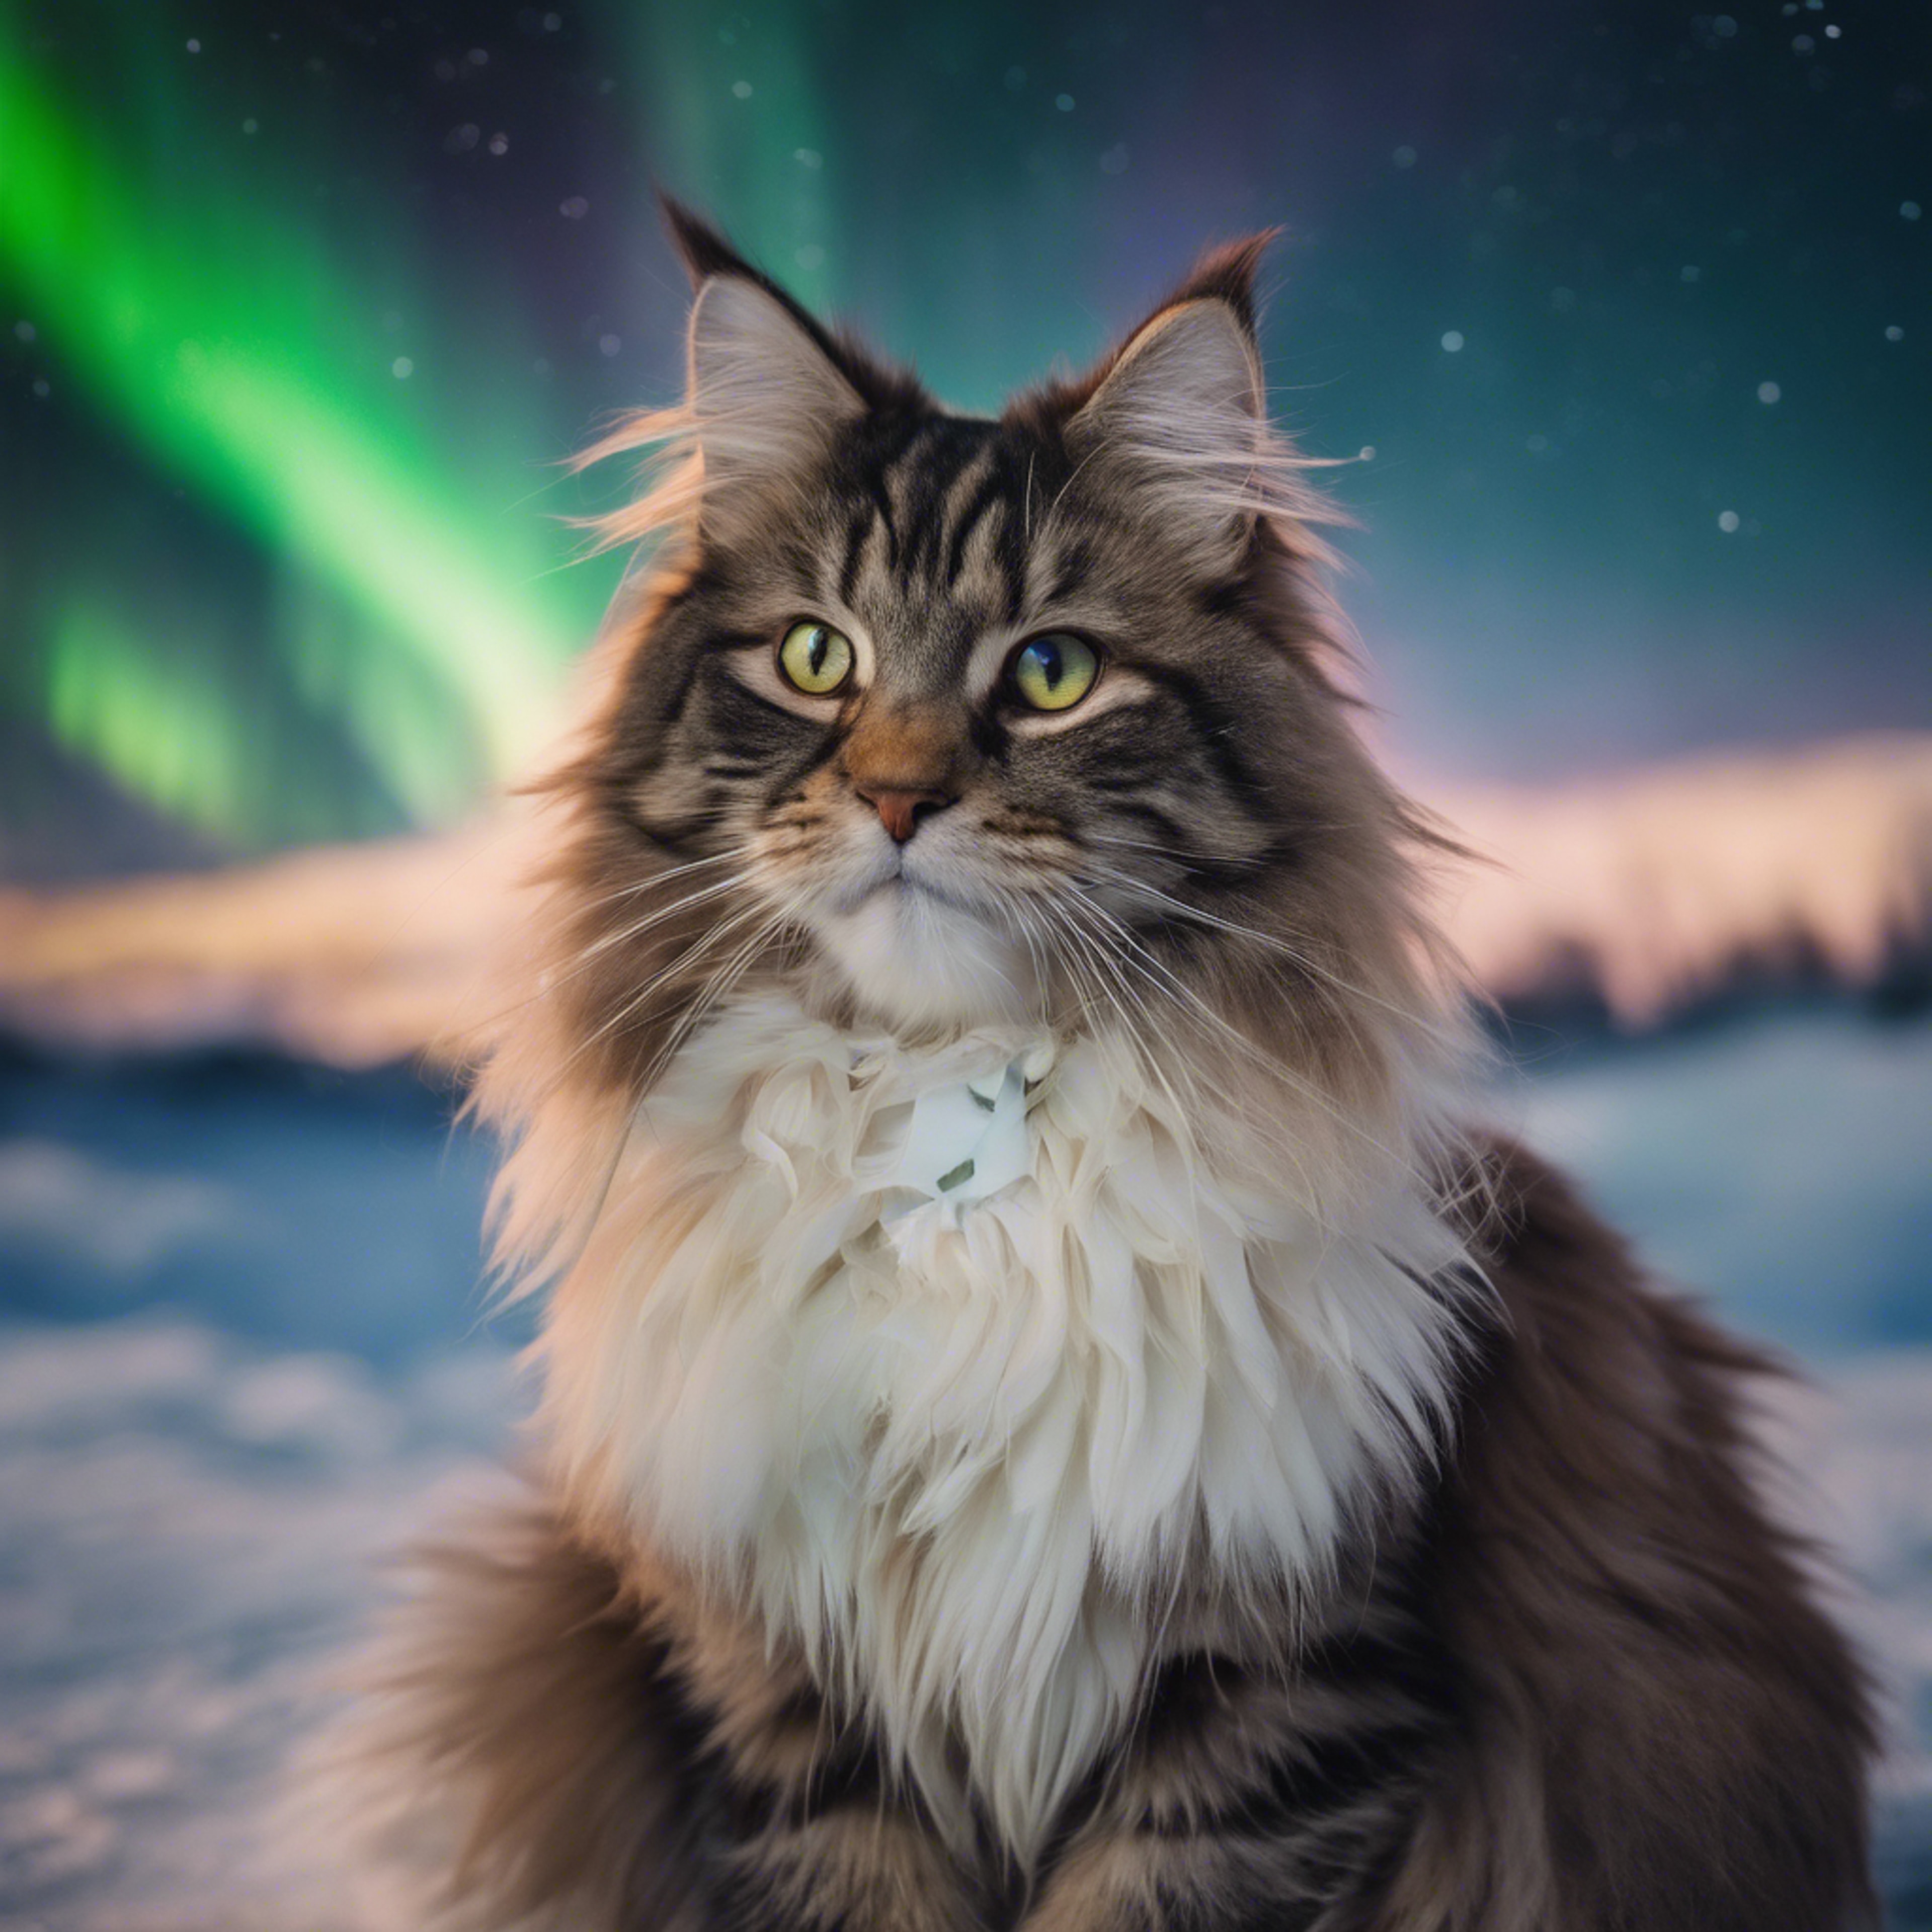 A Norwegian Forest cat sitting quietly under the aurora borealis, its eyes reflecting the dancing lights. Tapeta na zeď[1b2a9174317e40c9a8f4]